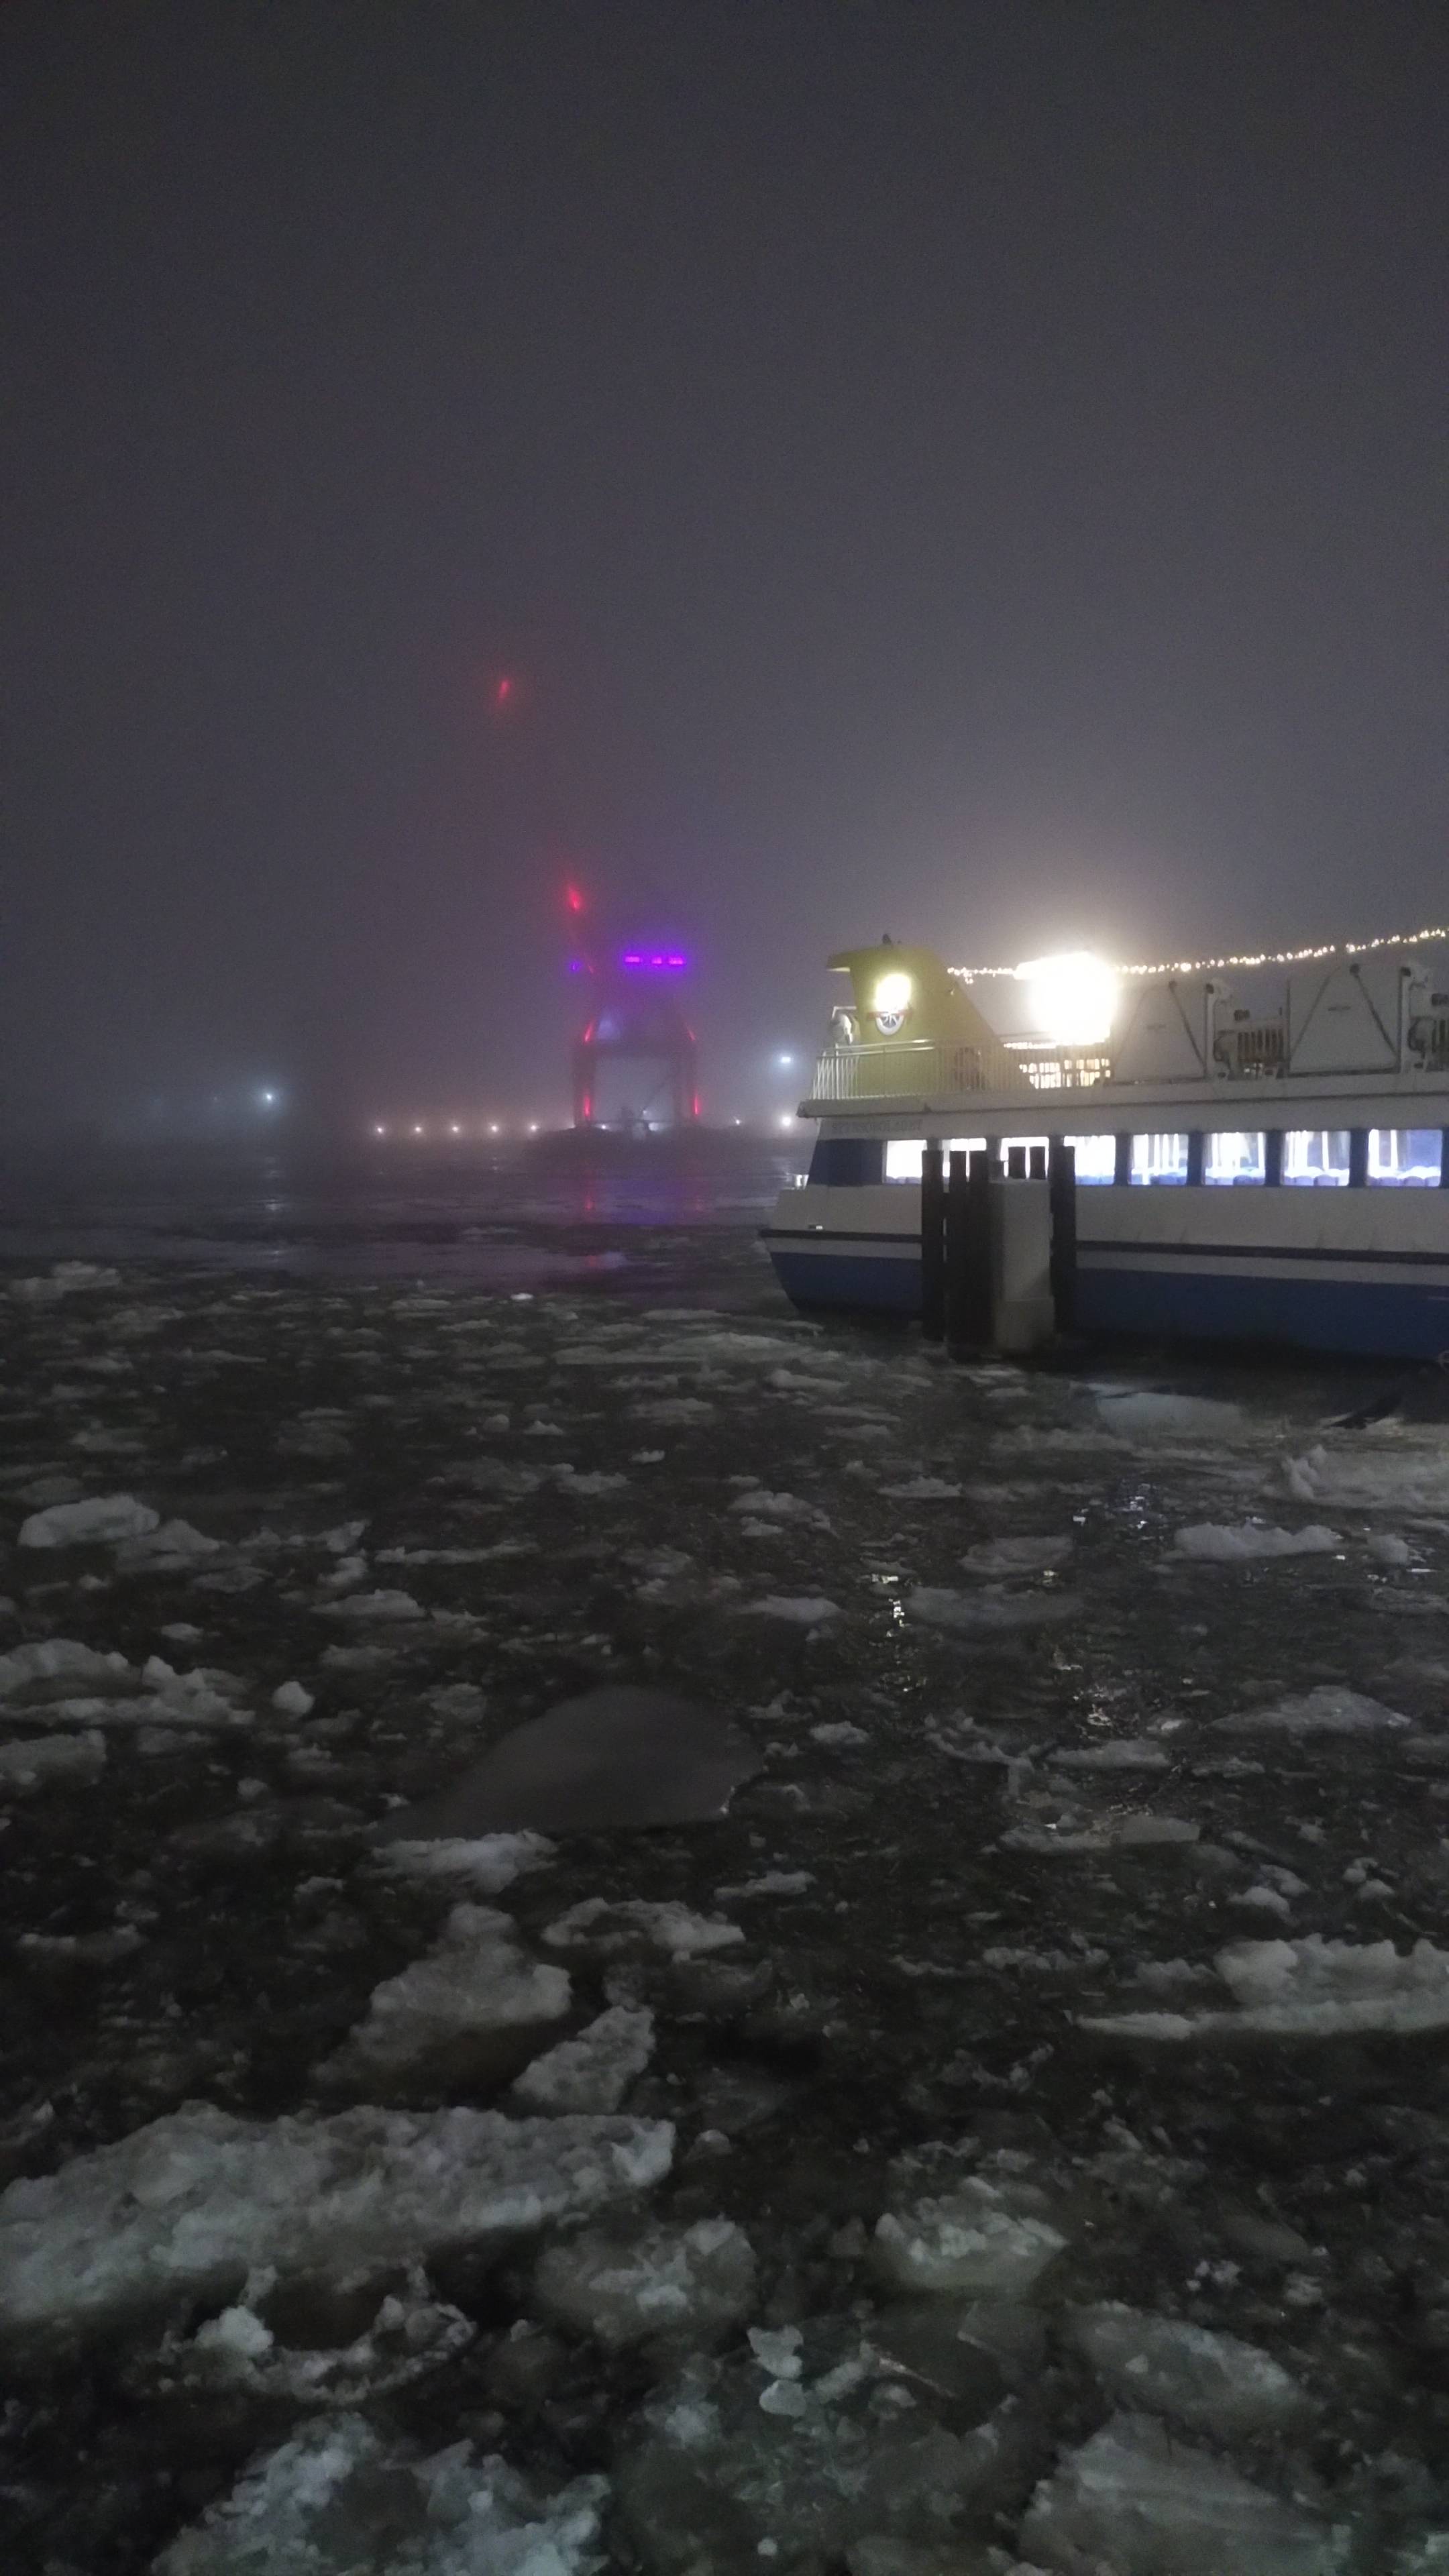 An icy river with a ferry just arriving. In the background you can almost see a crane decorated with purple lights through the fog.